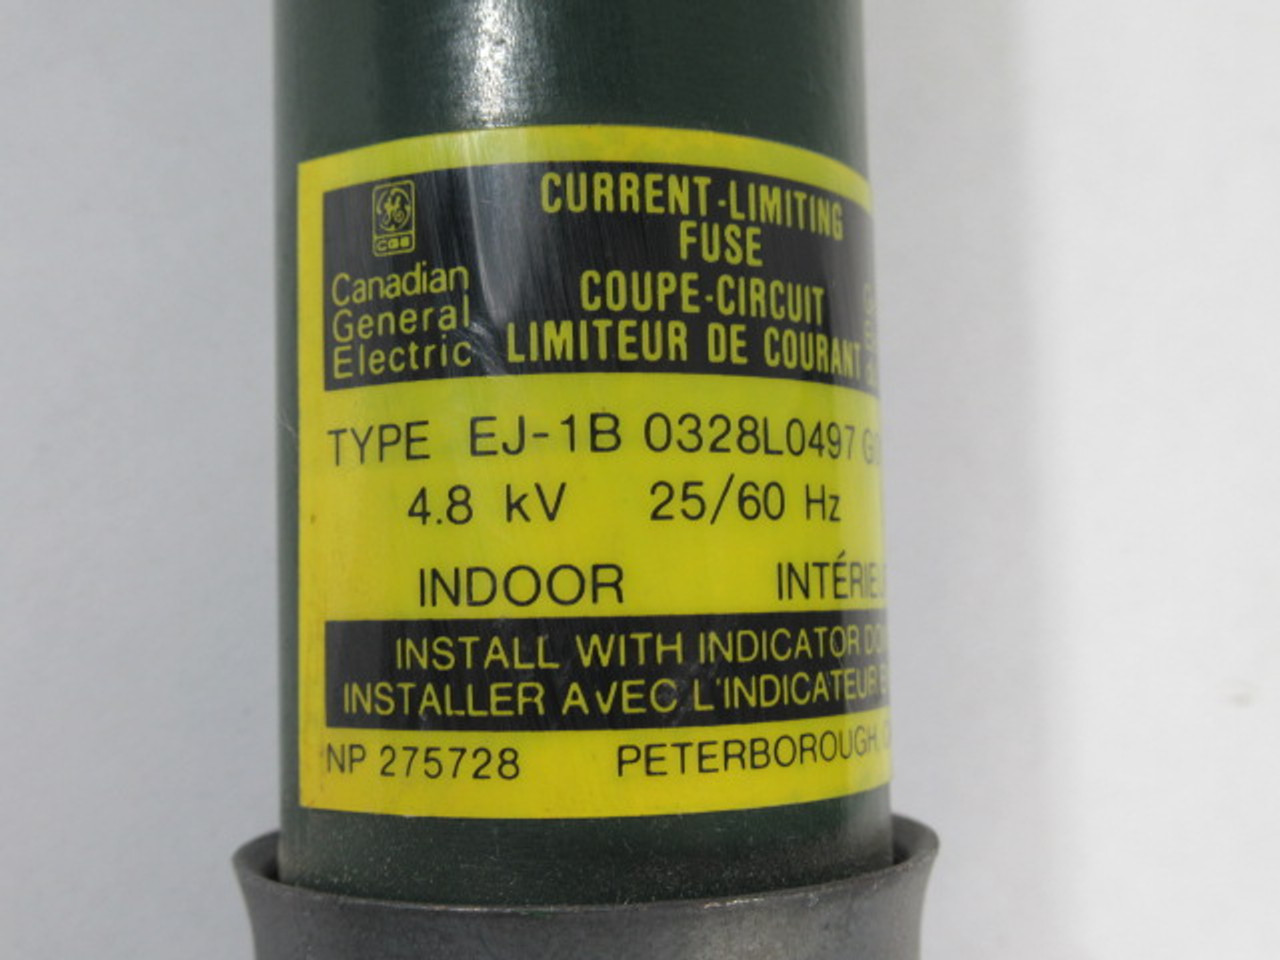 CGE EJ-1B-0328L0497-G013 Current Limiting Fuse 2E A 4.8KV 25/60Hz USED